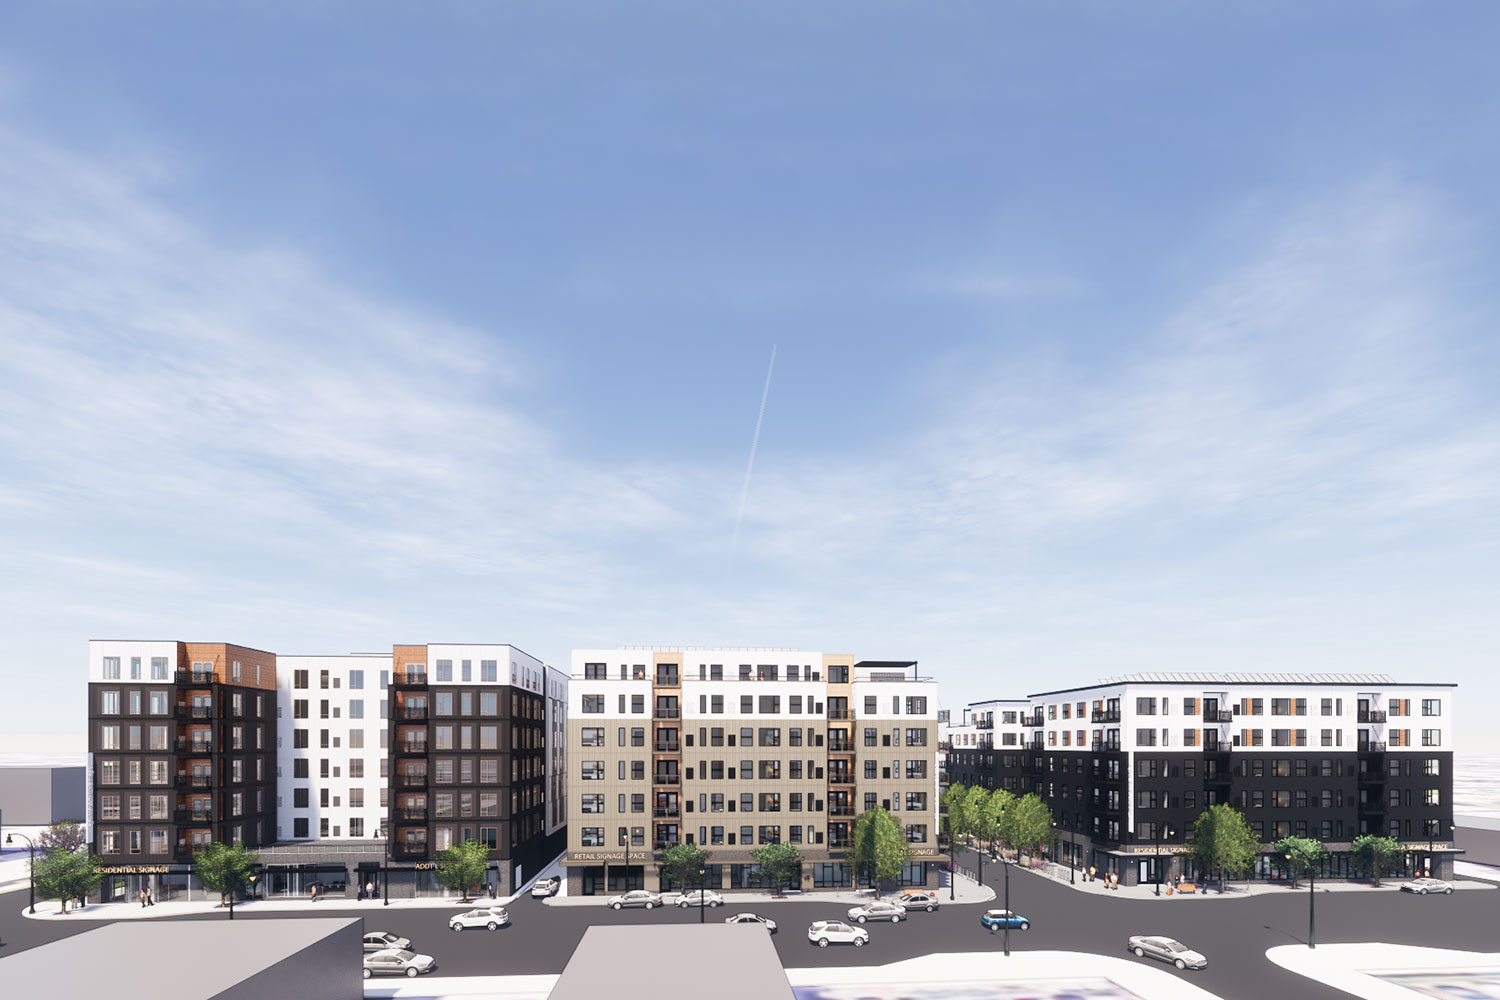 City approvals jumpstart second and third phases of Lupe Development Partners’ mixed-income project at Lyn-Lake